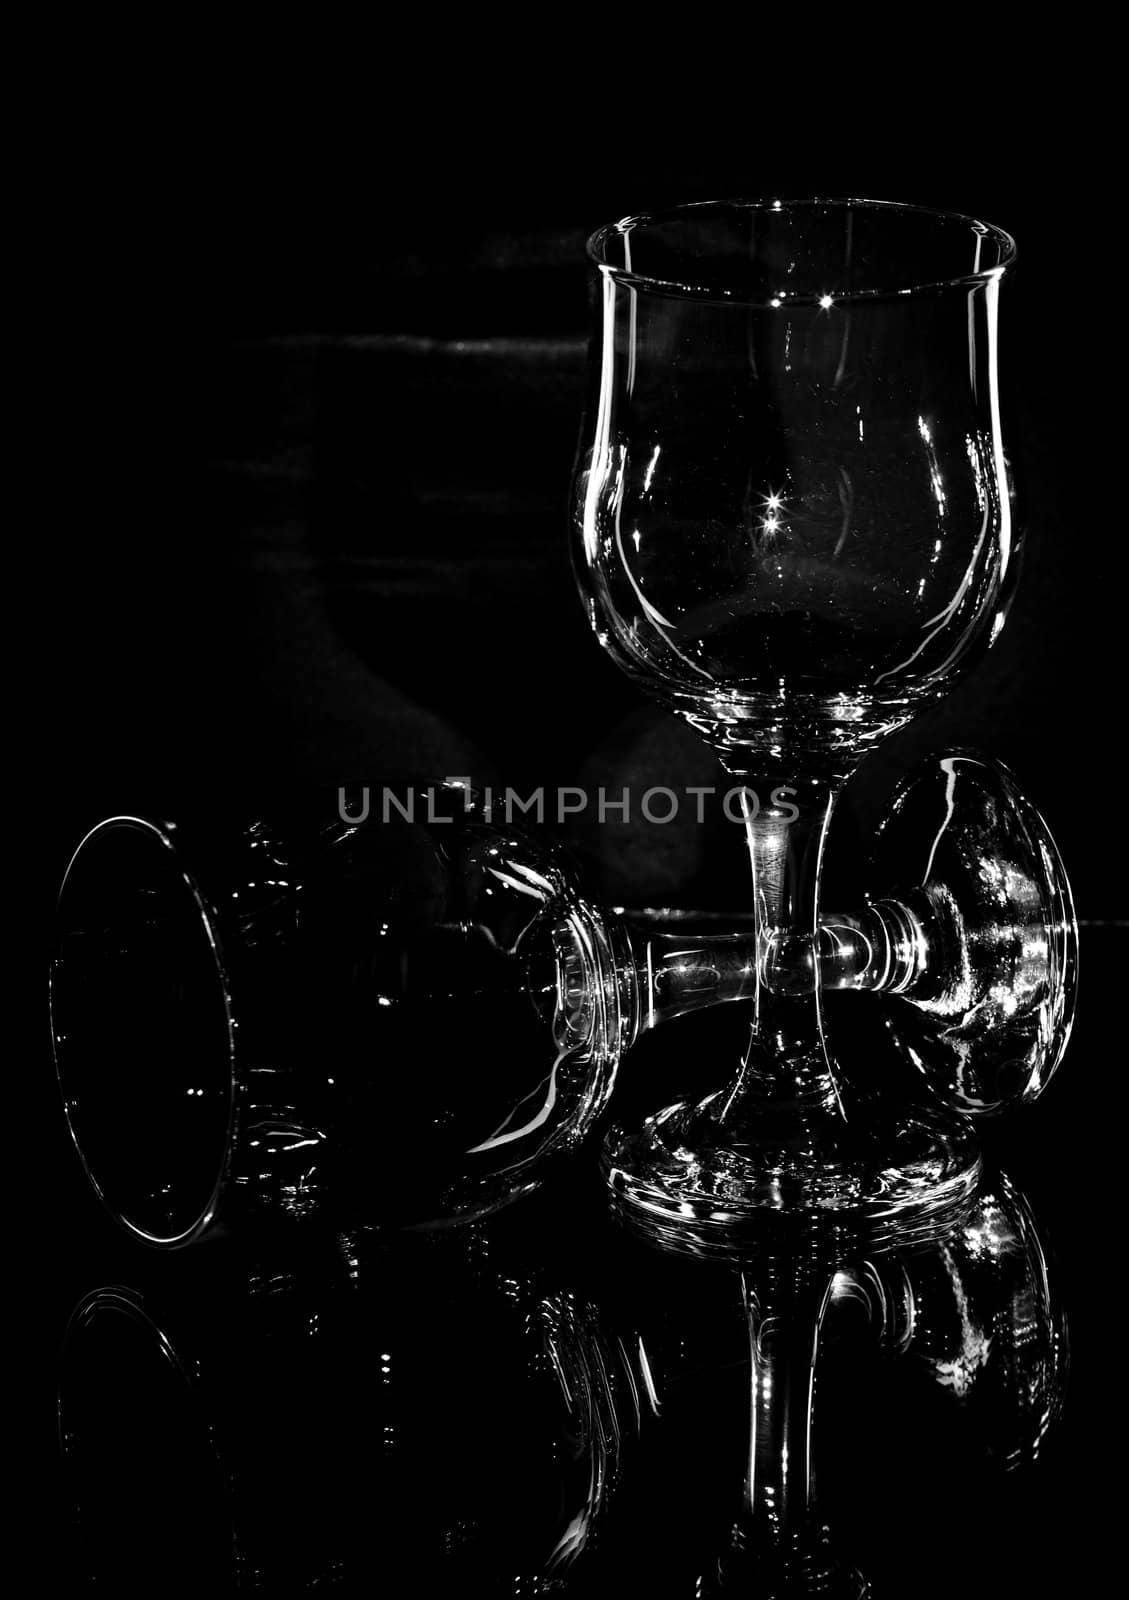 Wine glasses on a black background with reflection on glass